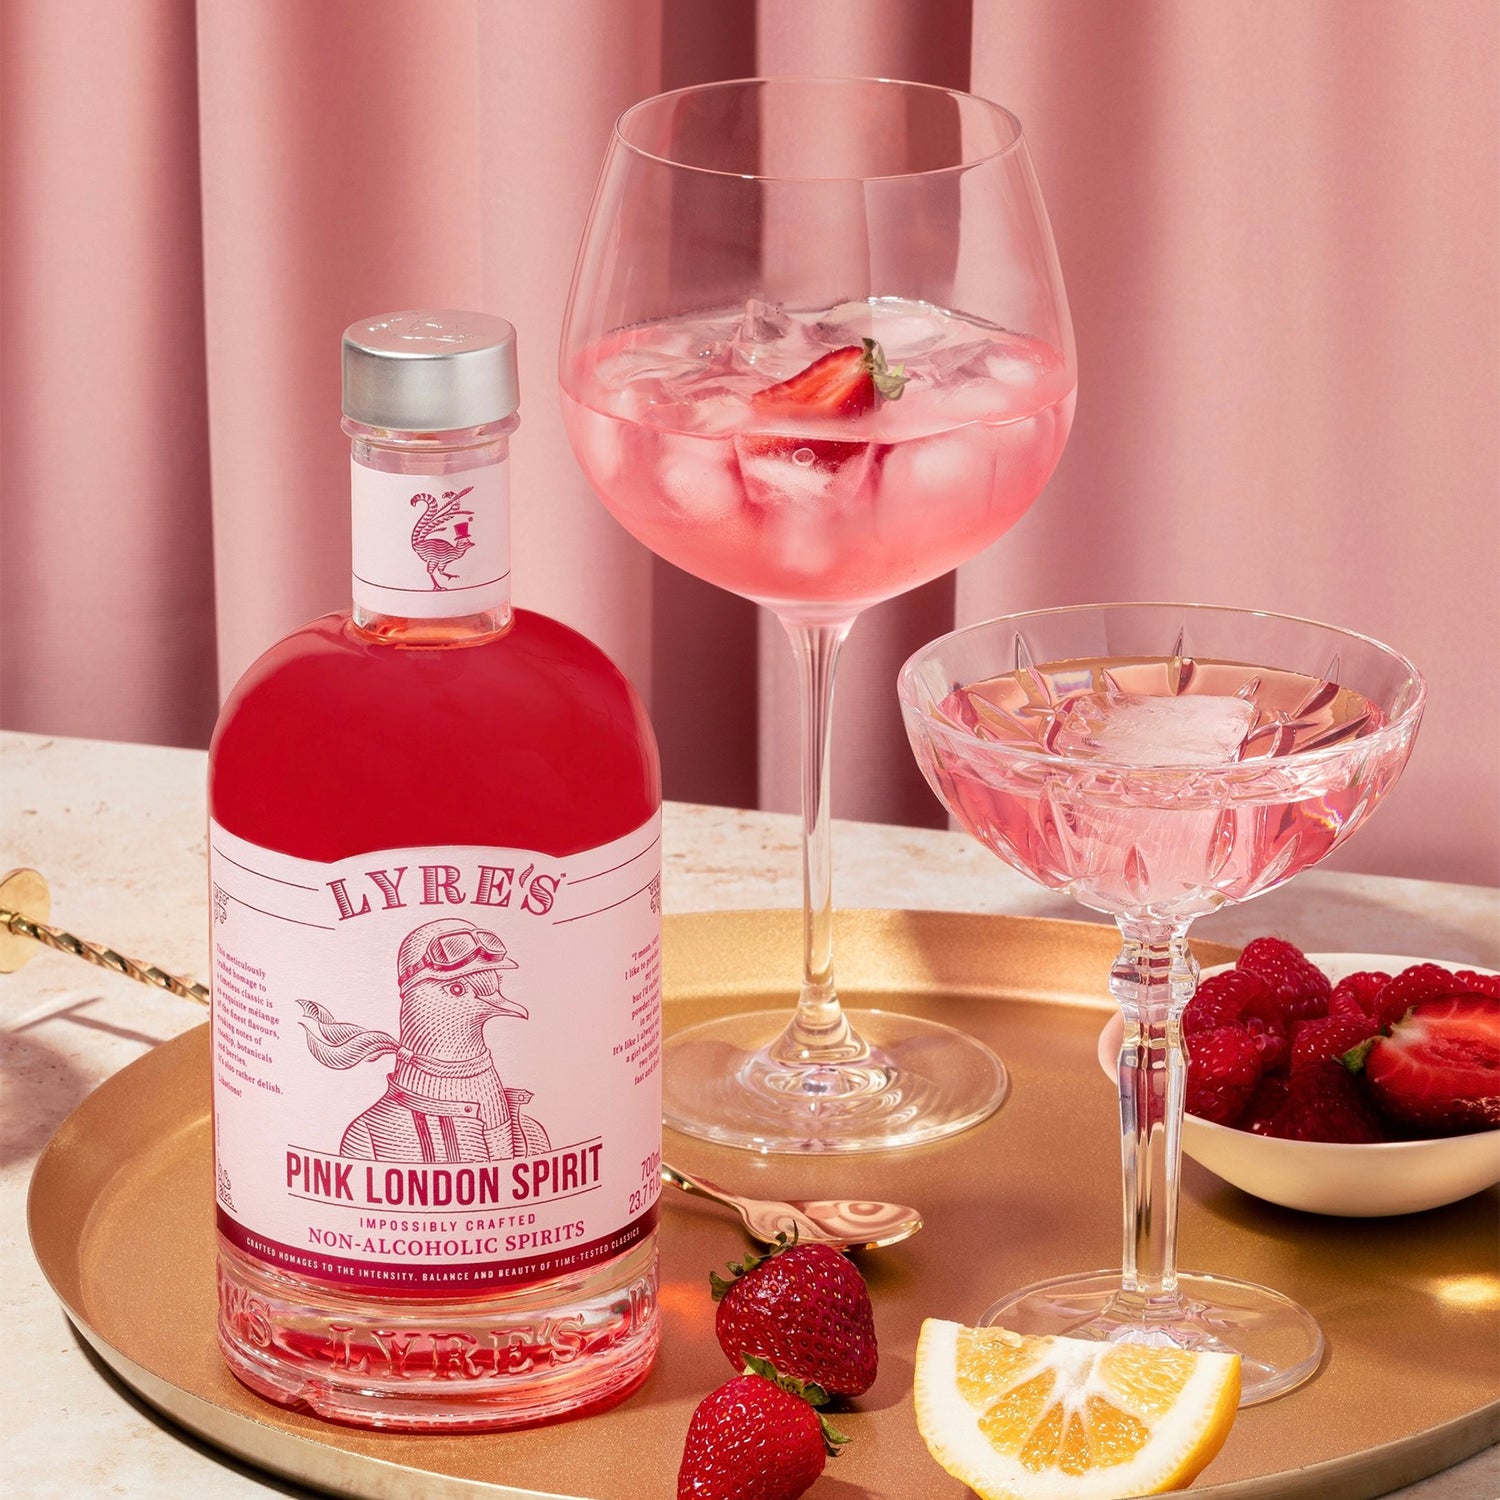 Lyre's non-alcoholic pink gin